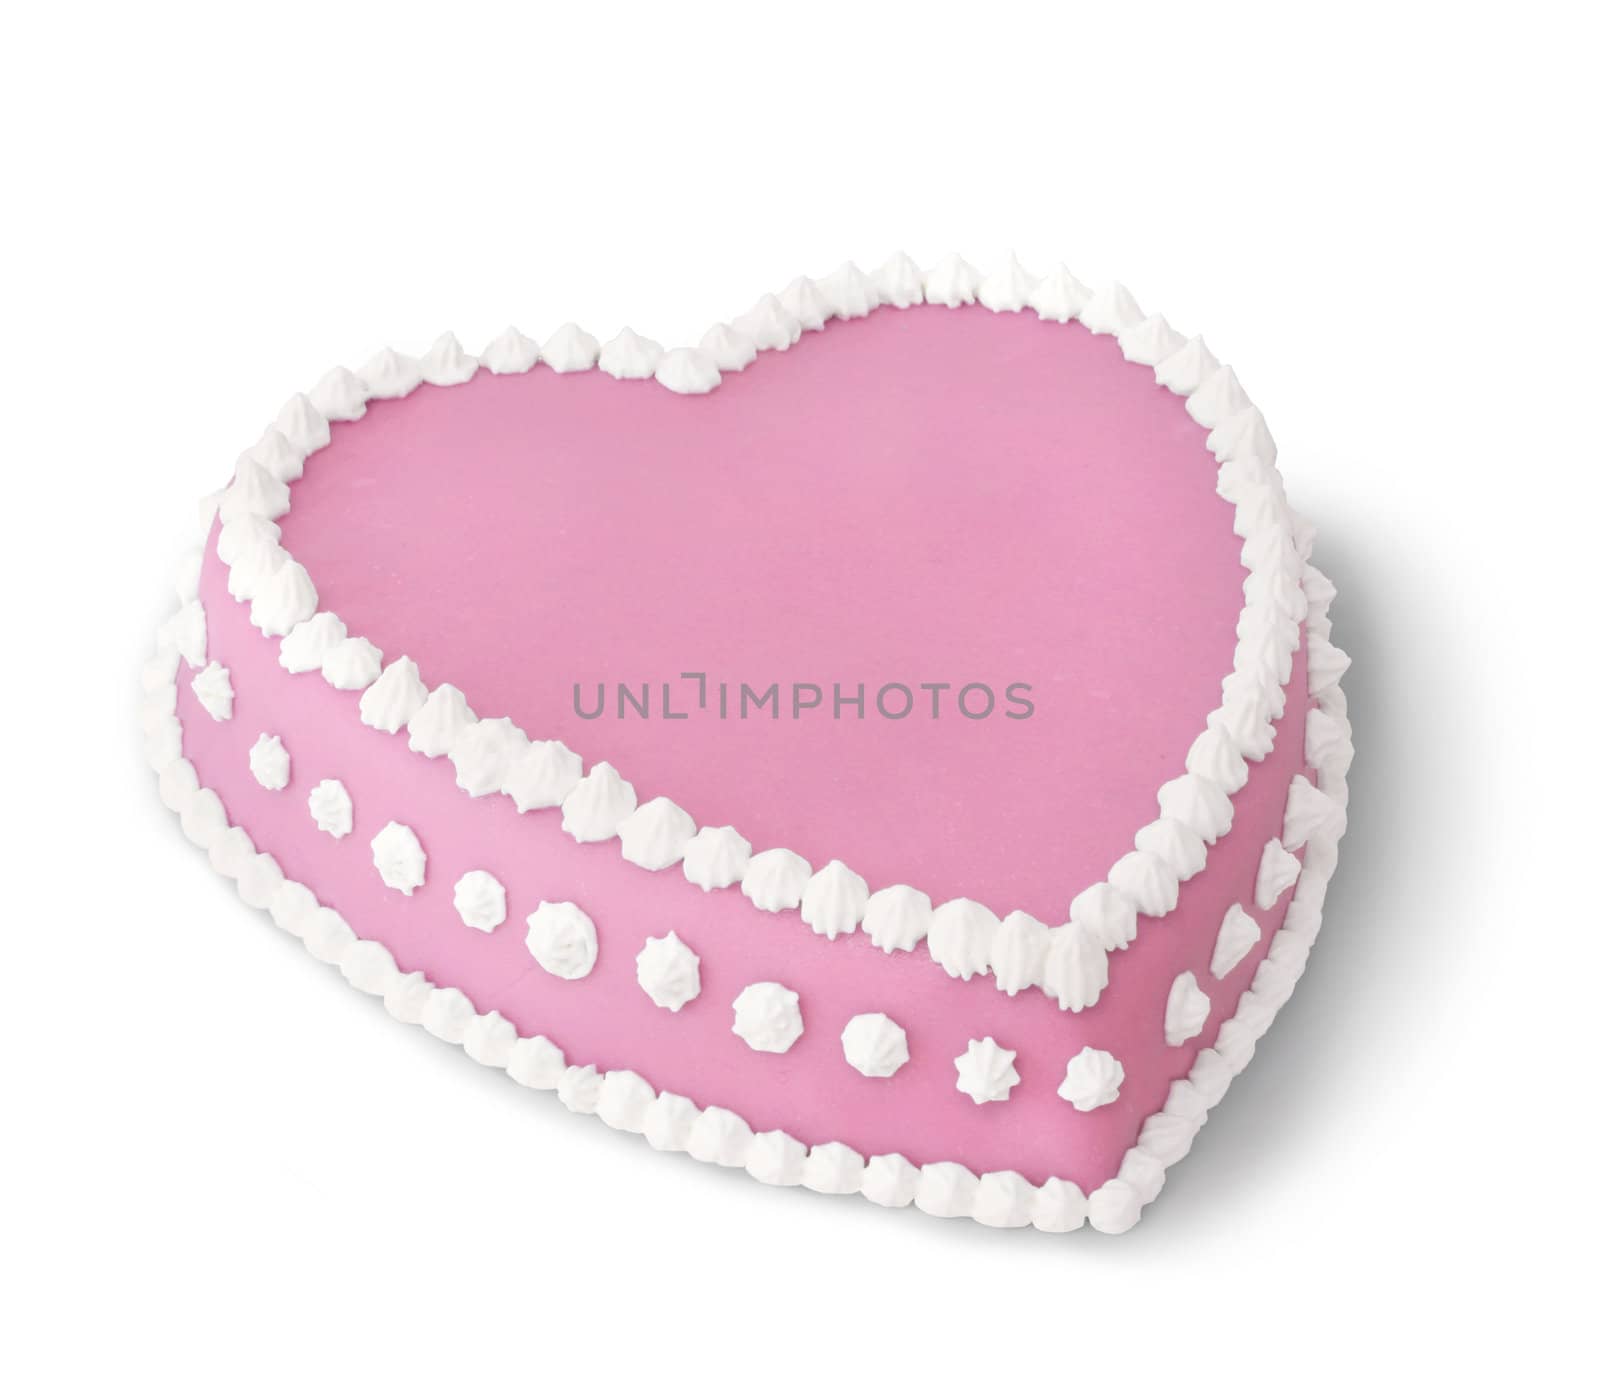 Pink heart shape marzipan cake decorated with white whipped cream